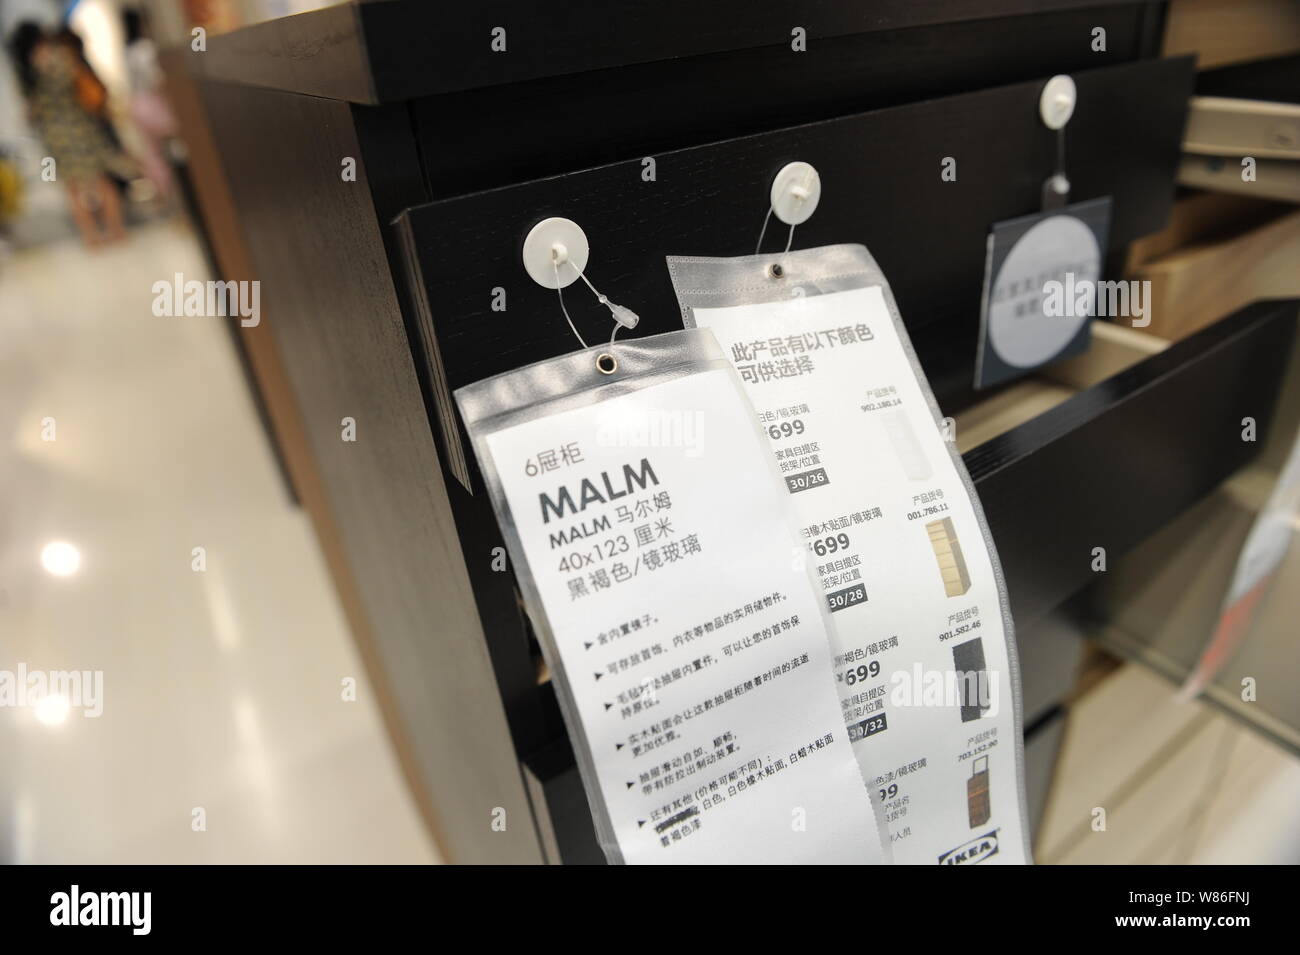 A Malm Dresser Is On Display At A Furnishing Store Of Ikea In